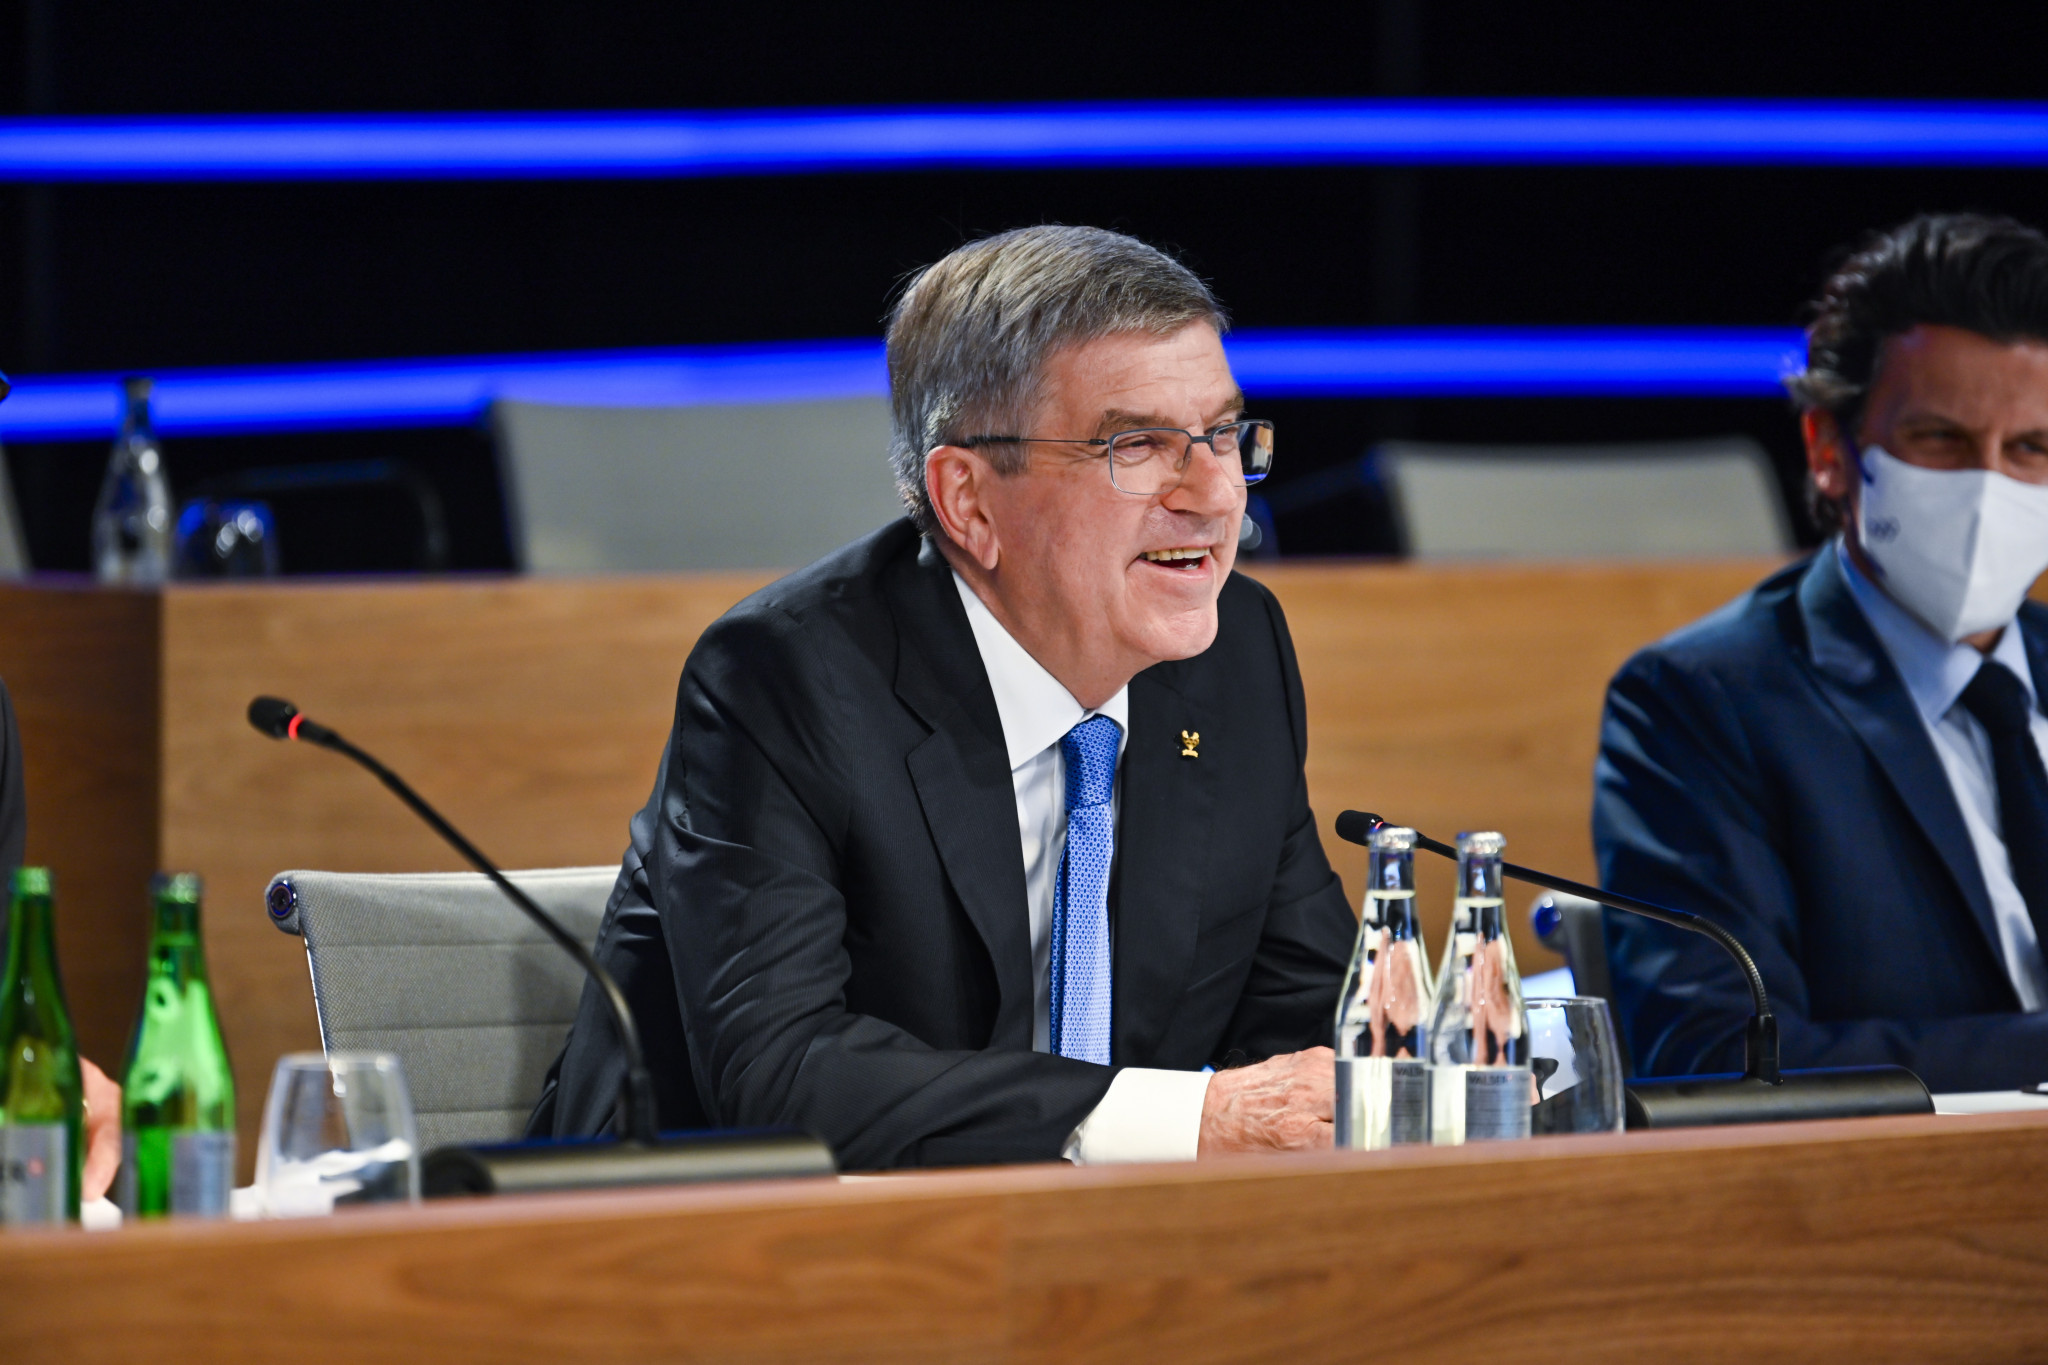 IOC President Thomas Bach insists decisions on transgender participation must be based on scientific evidence ©Getty Images